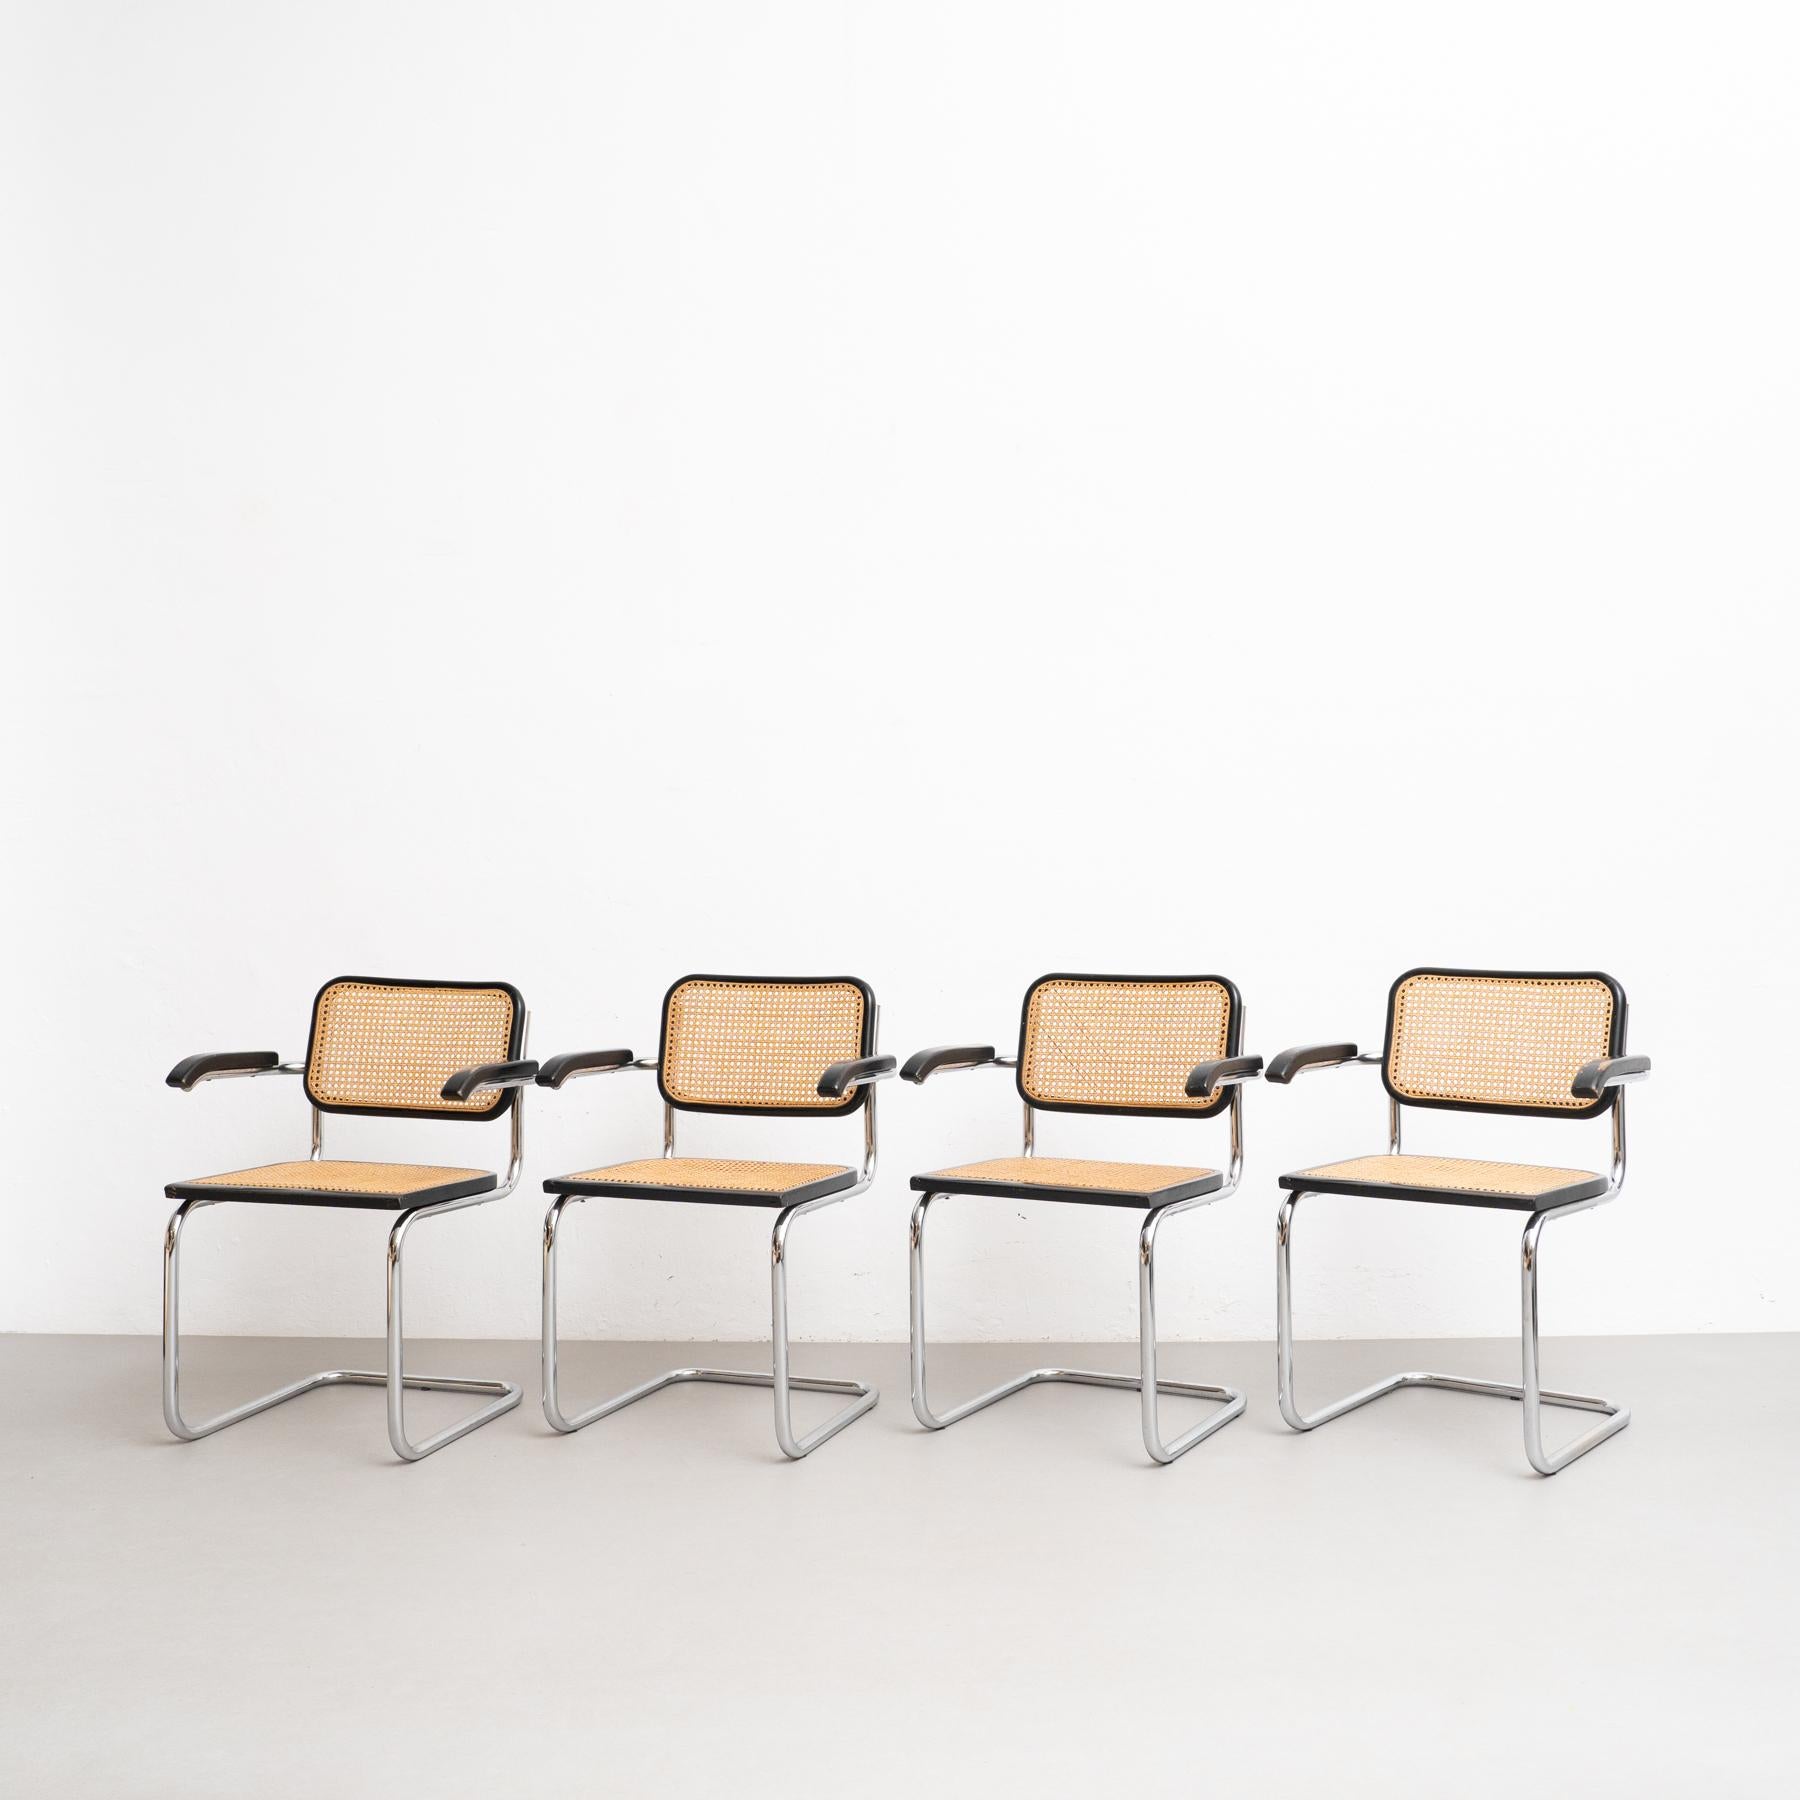 Set of 4 Cesca chairs, designed by Marcel Breuer.

Manufactured in Italy, circa 1960 by Unknown manufacturer.

Metal pipe frame, wood seat and back structure and rattan.

In good original condition, with minor wear consistent with age and use,